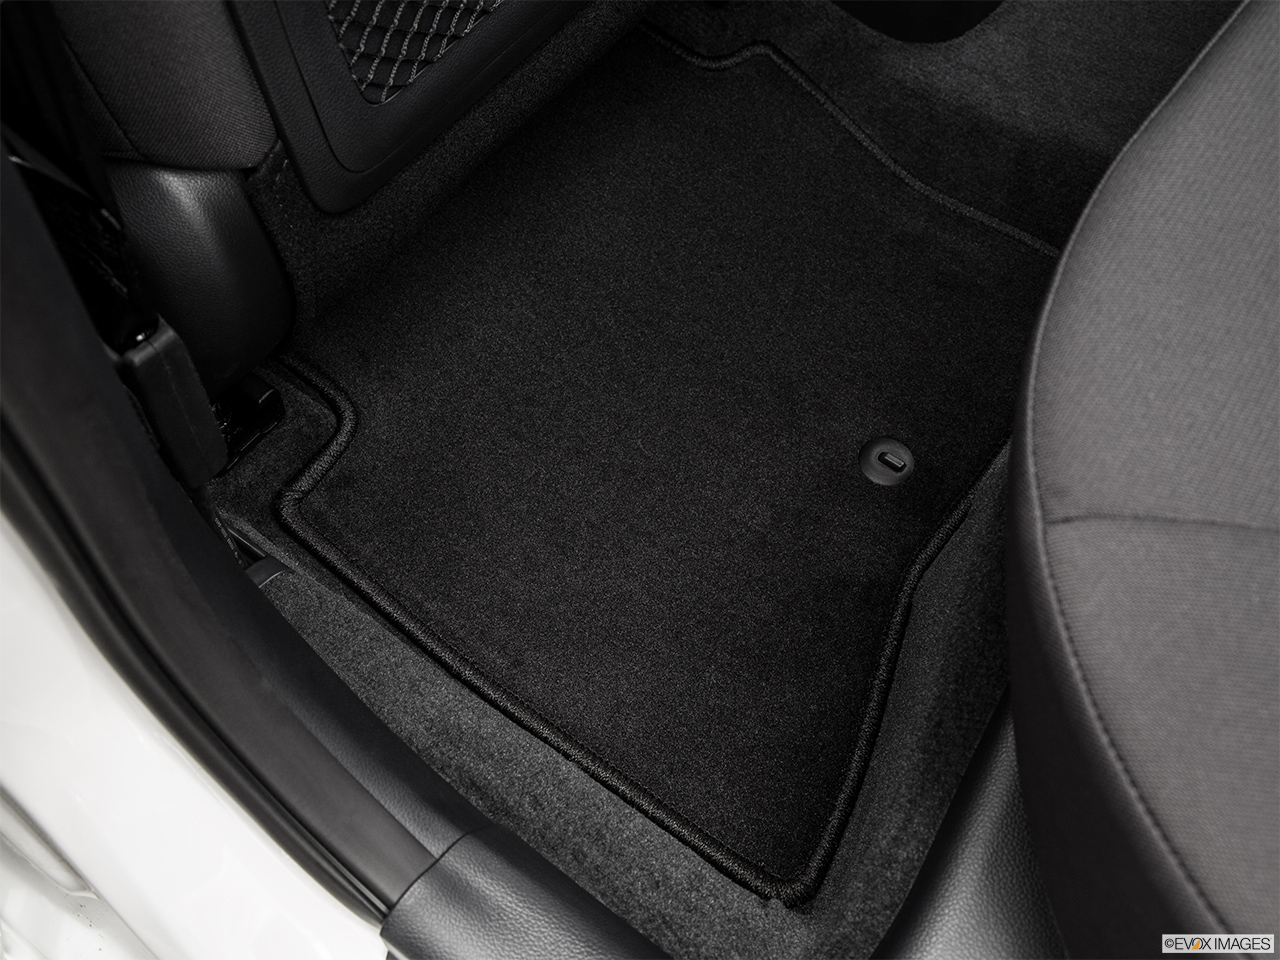 2016 Kia Rio 5-door LX Rear driver's side floor mat. Mid-seat level from outside looking in. 